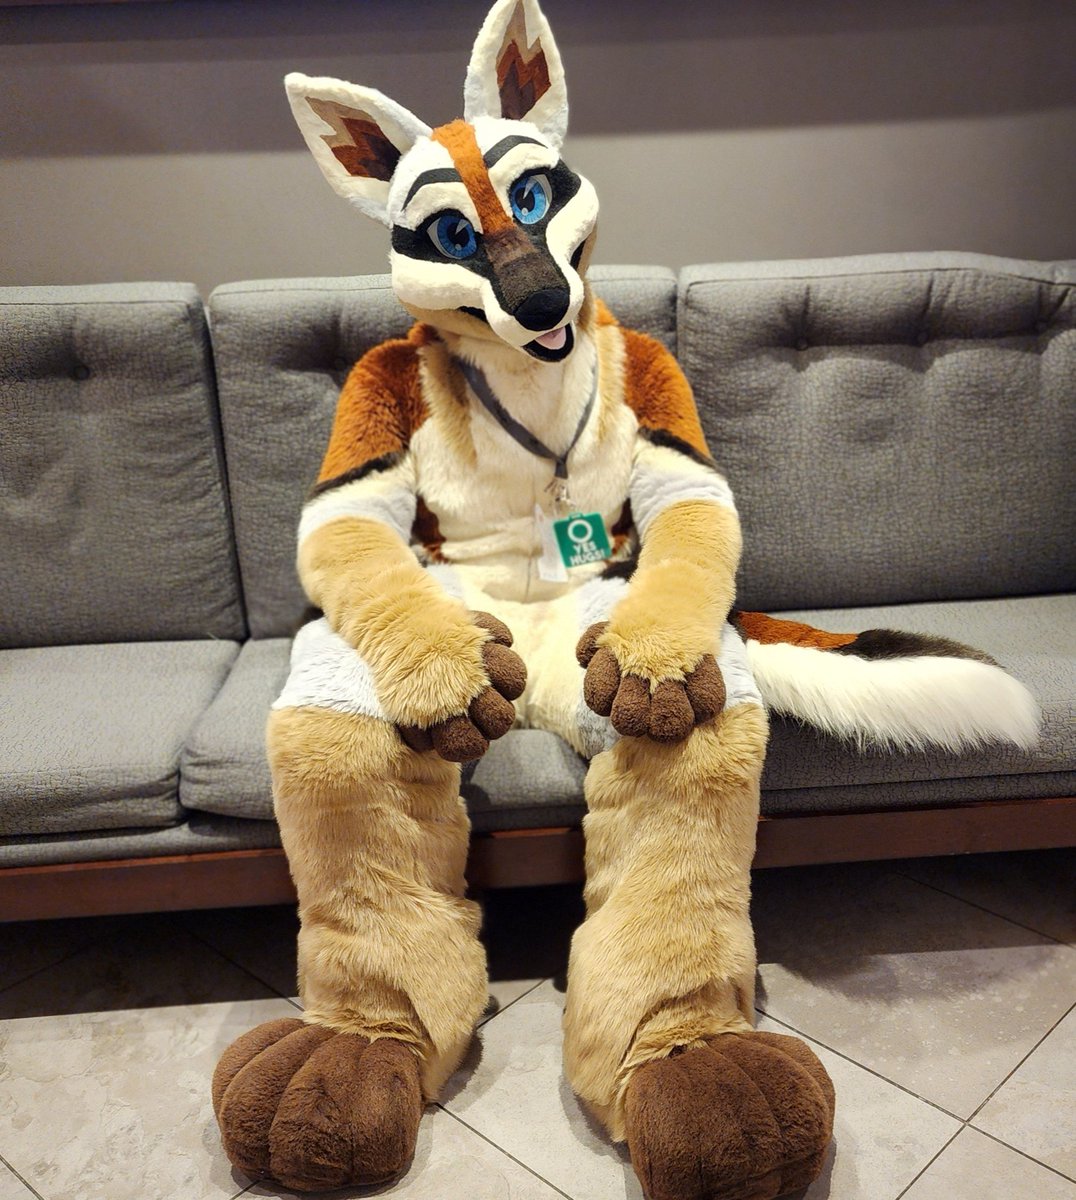 Lookin like an NPC waiting to give you a side quest 💬
#FursuitsFriday